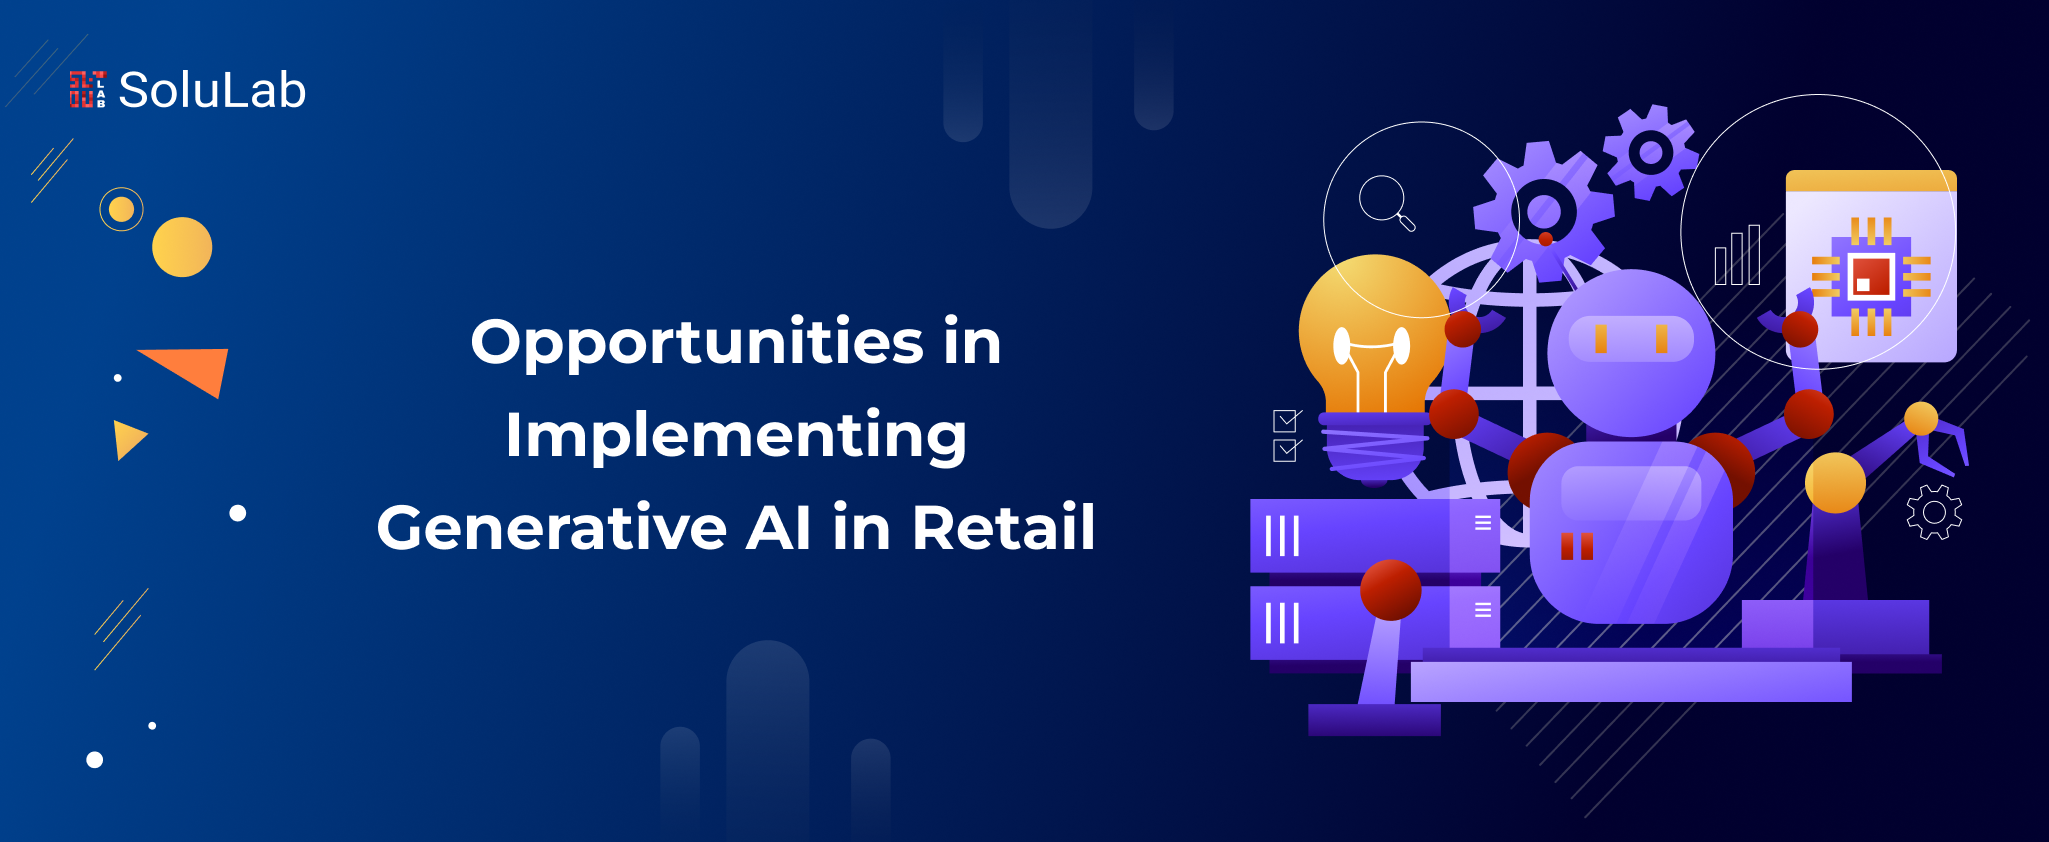 Opportunities in Implementing Generative AI in Retail